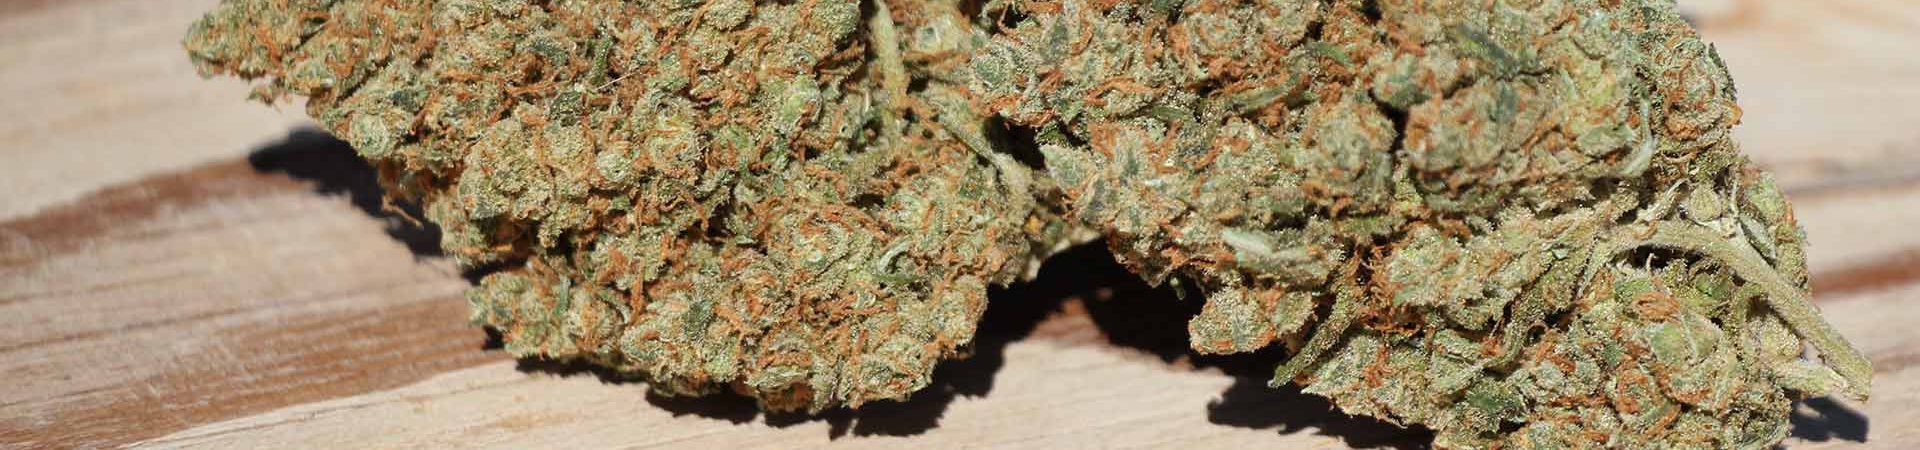 Jack Herer Cannabis Strain [2022 Updated Review]